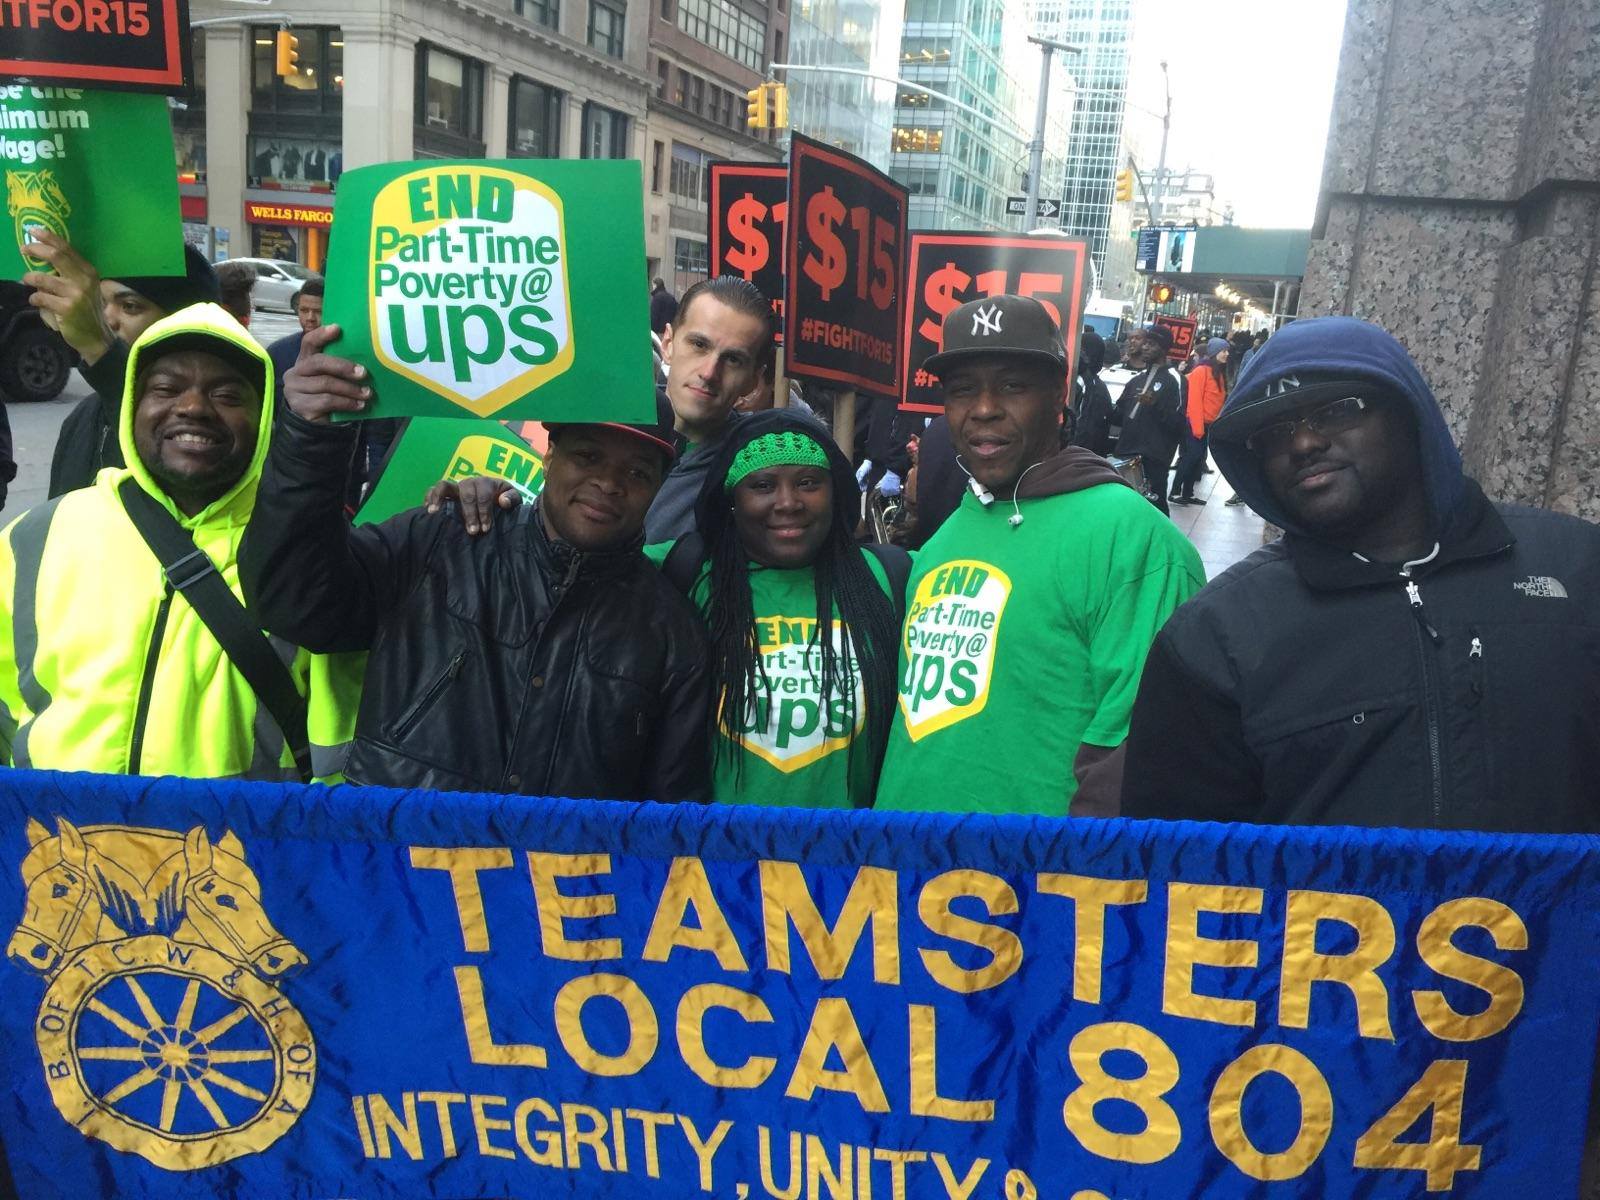 Teamsters Local 804 at Fight for $15